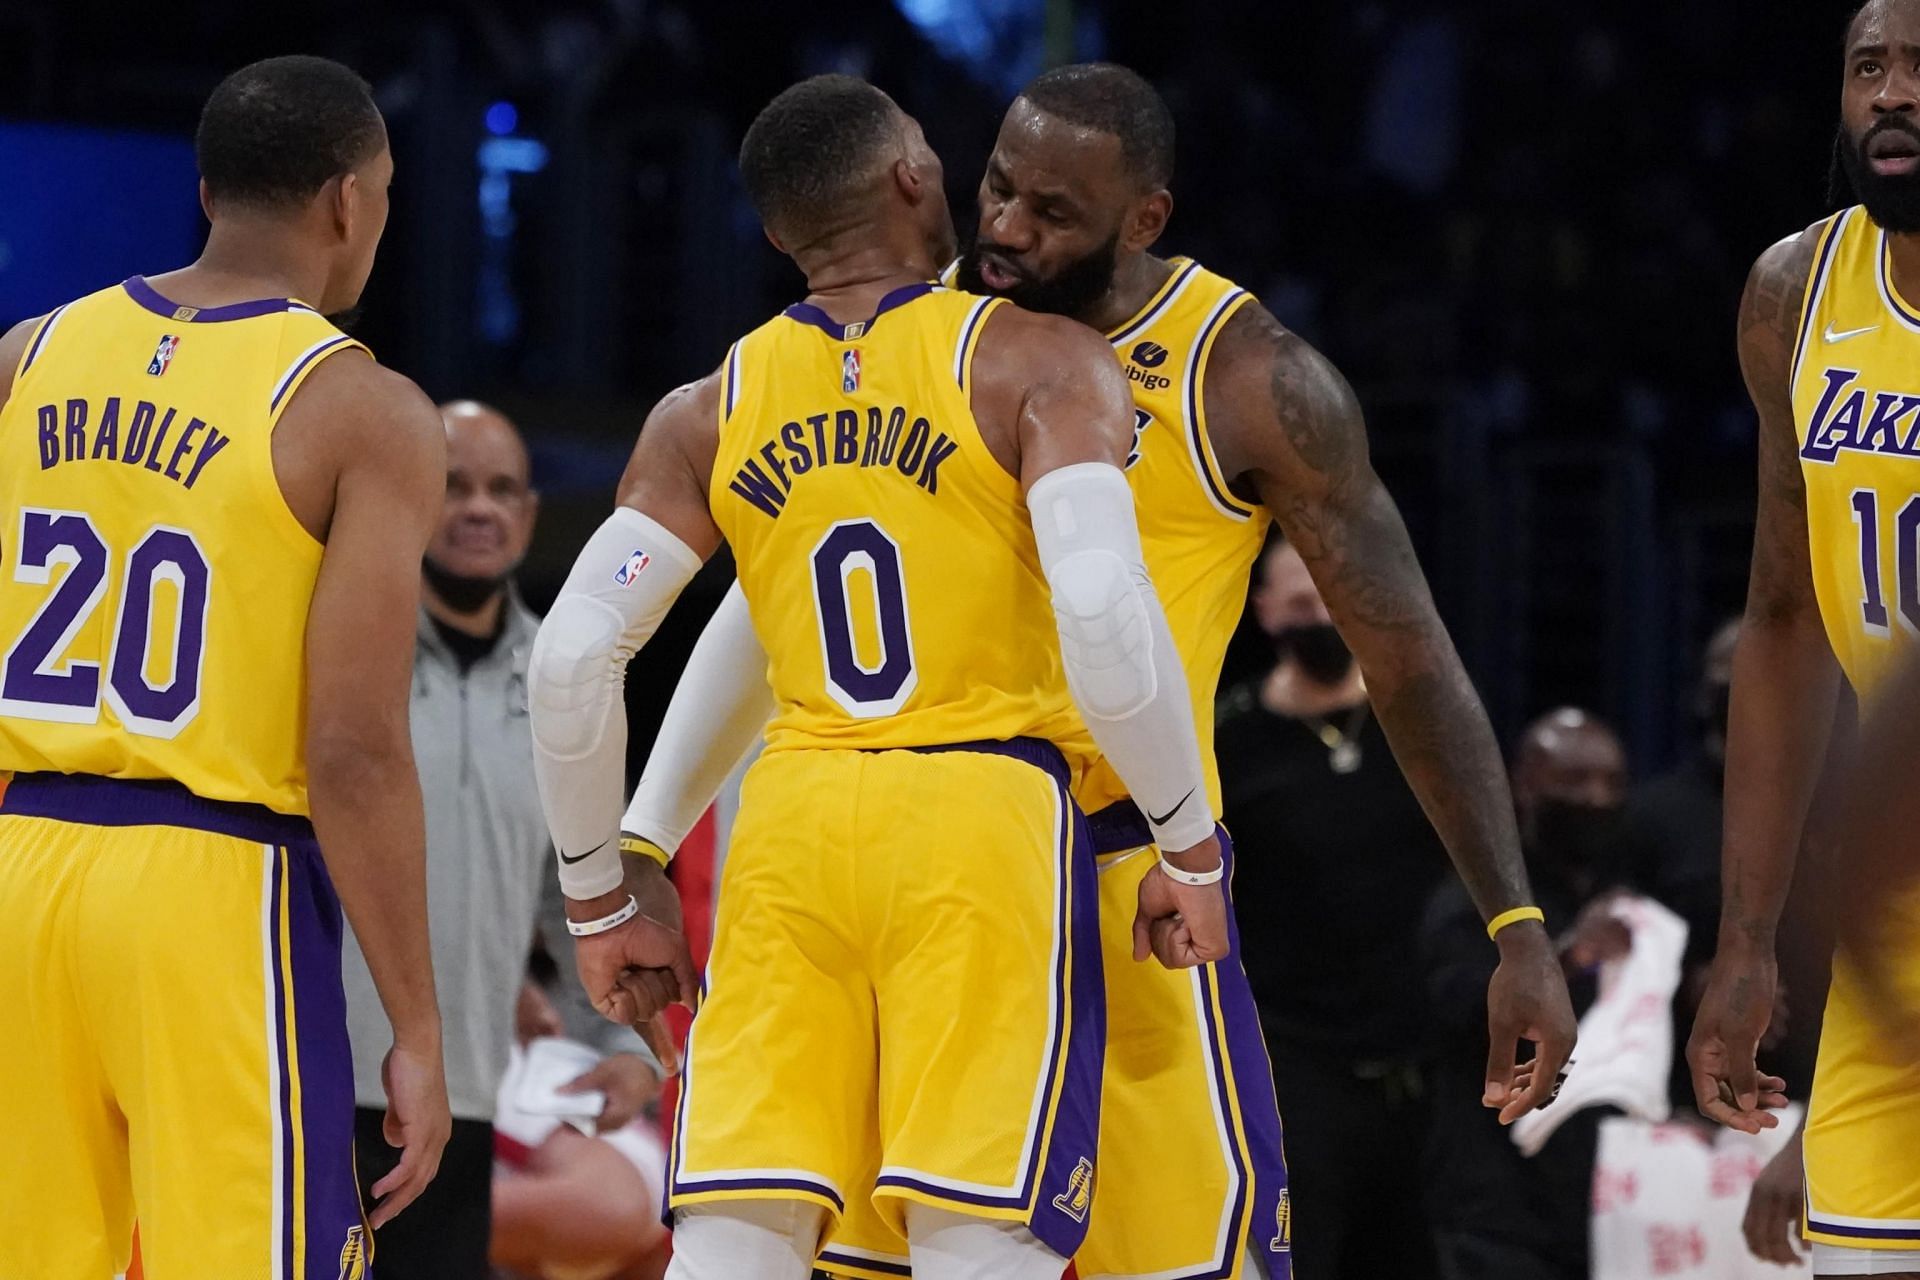 Russell Westbrook, LeBron James and the Los Angeles Lakers dumped 56 points in the paint tonight against the Boston Celtics. [Photo: Bleacher Report]